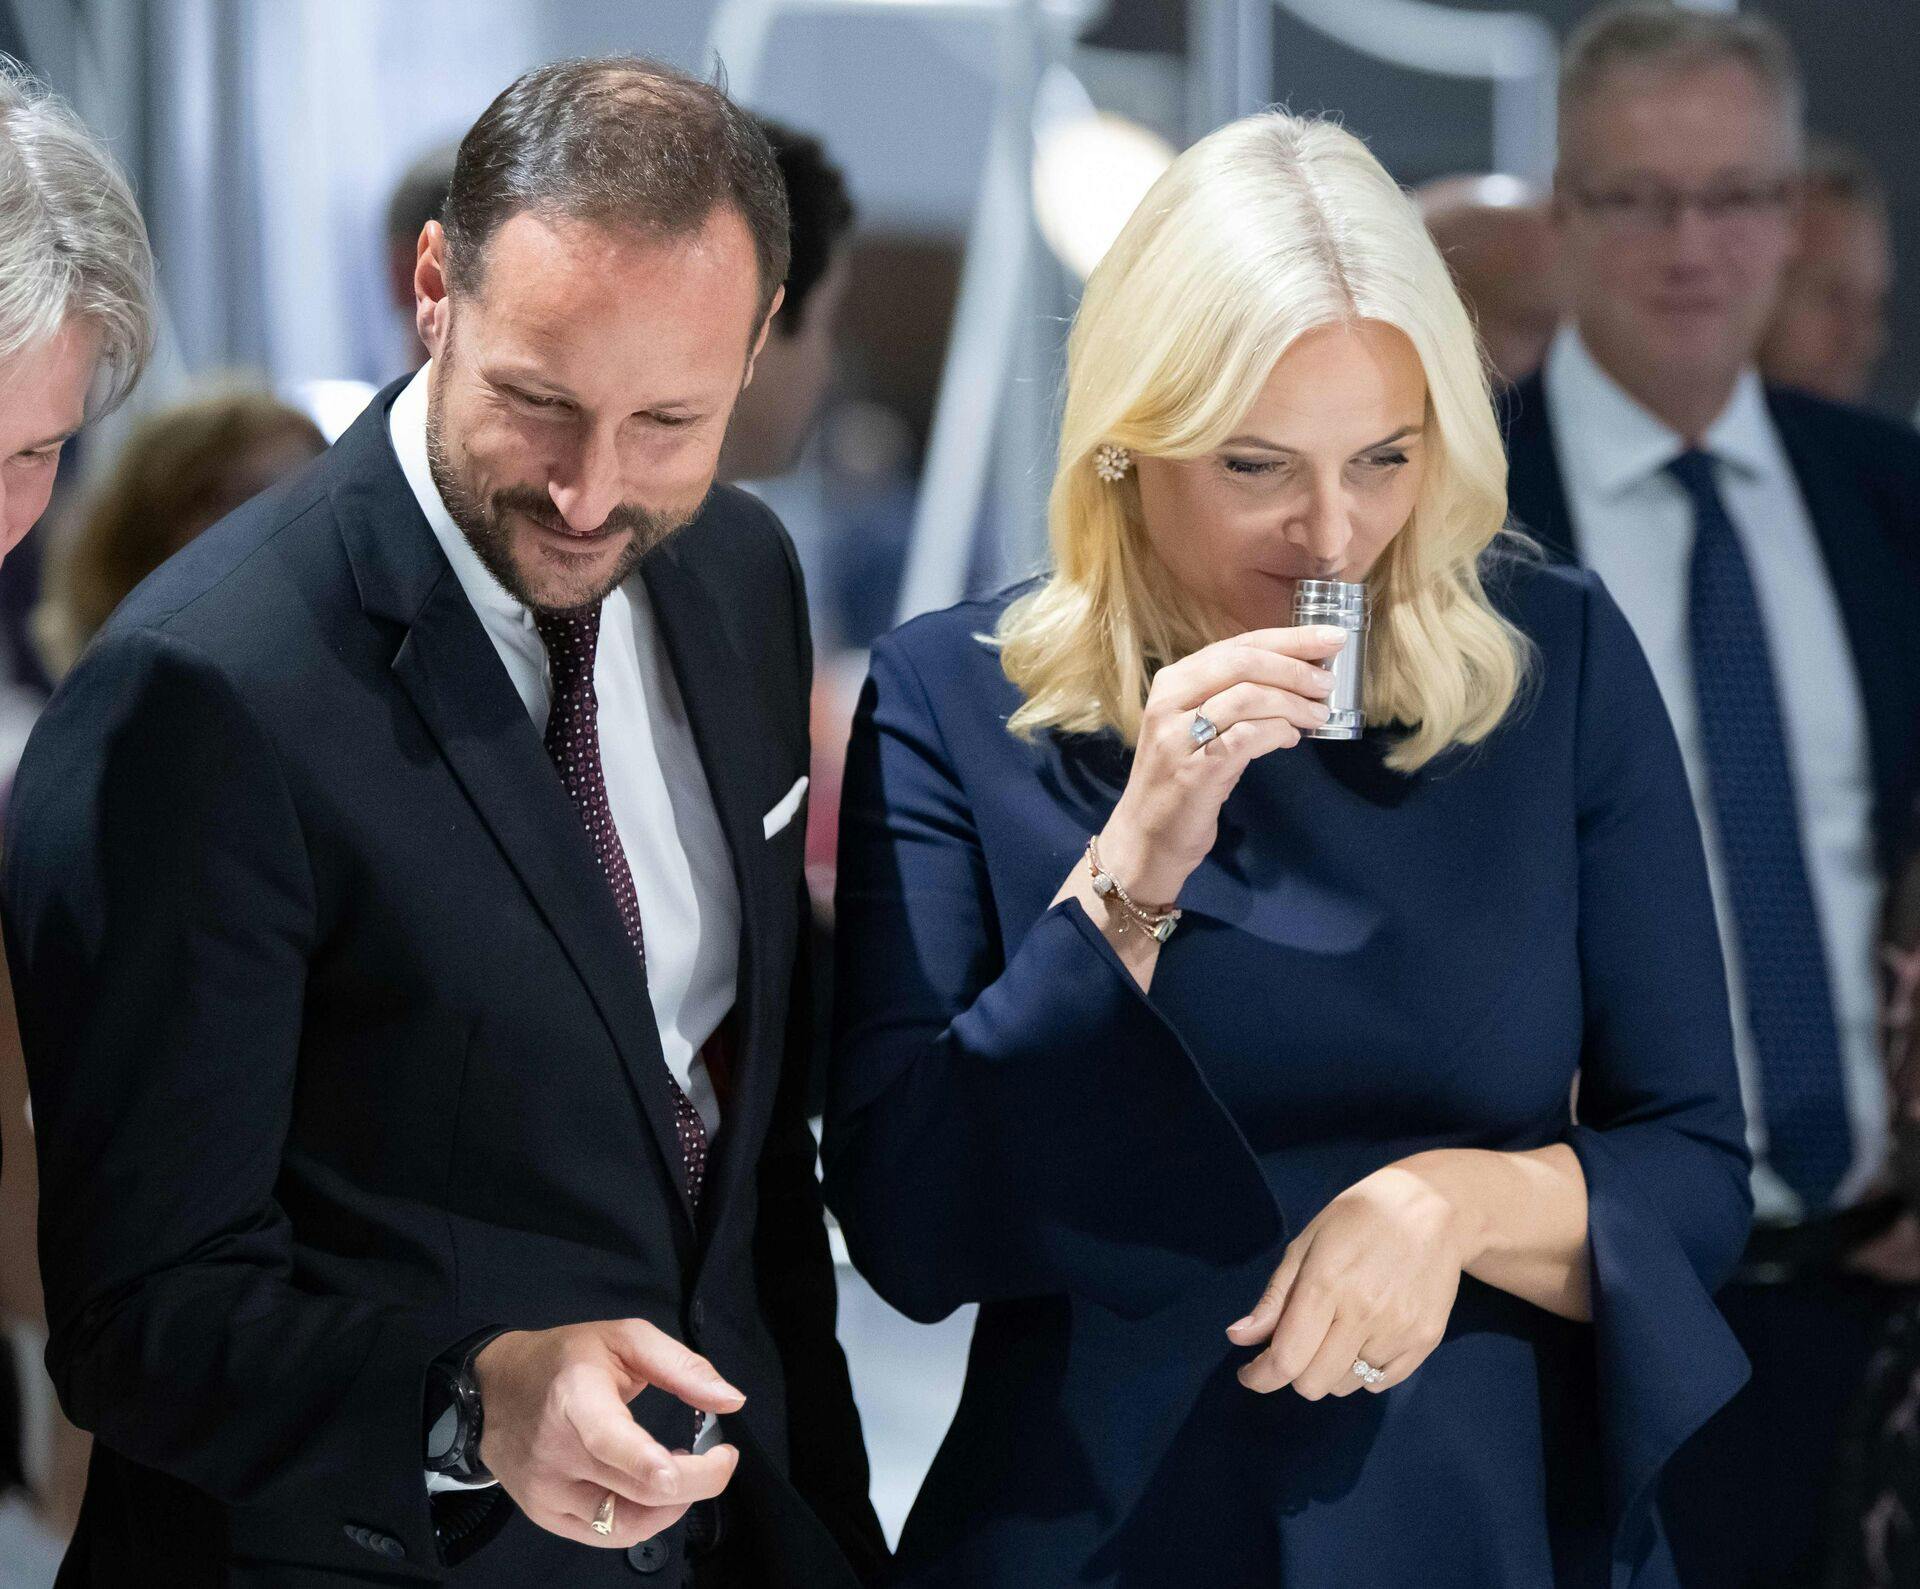 Crown Princess Mette-Marit of Norway trys an odour test while visiting an art installation with Crown Prince Haakon of Norway attend the opening of the Frankfurt Book Fair on October 15, 2019 in Frankfurt am Main, western Germany. - Norway is this year's honorary guest of the fair running from October 16 to 20, 2019. (Photo by Silas Stein / dpa / AFP) / Germany OUT